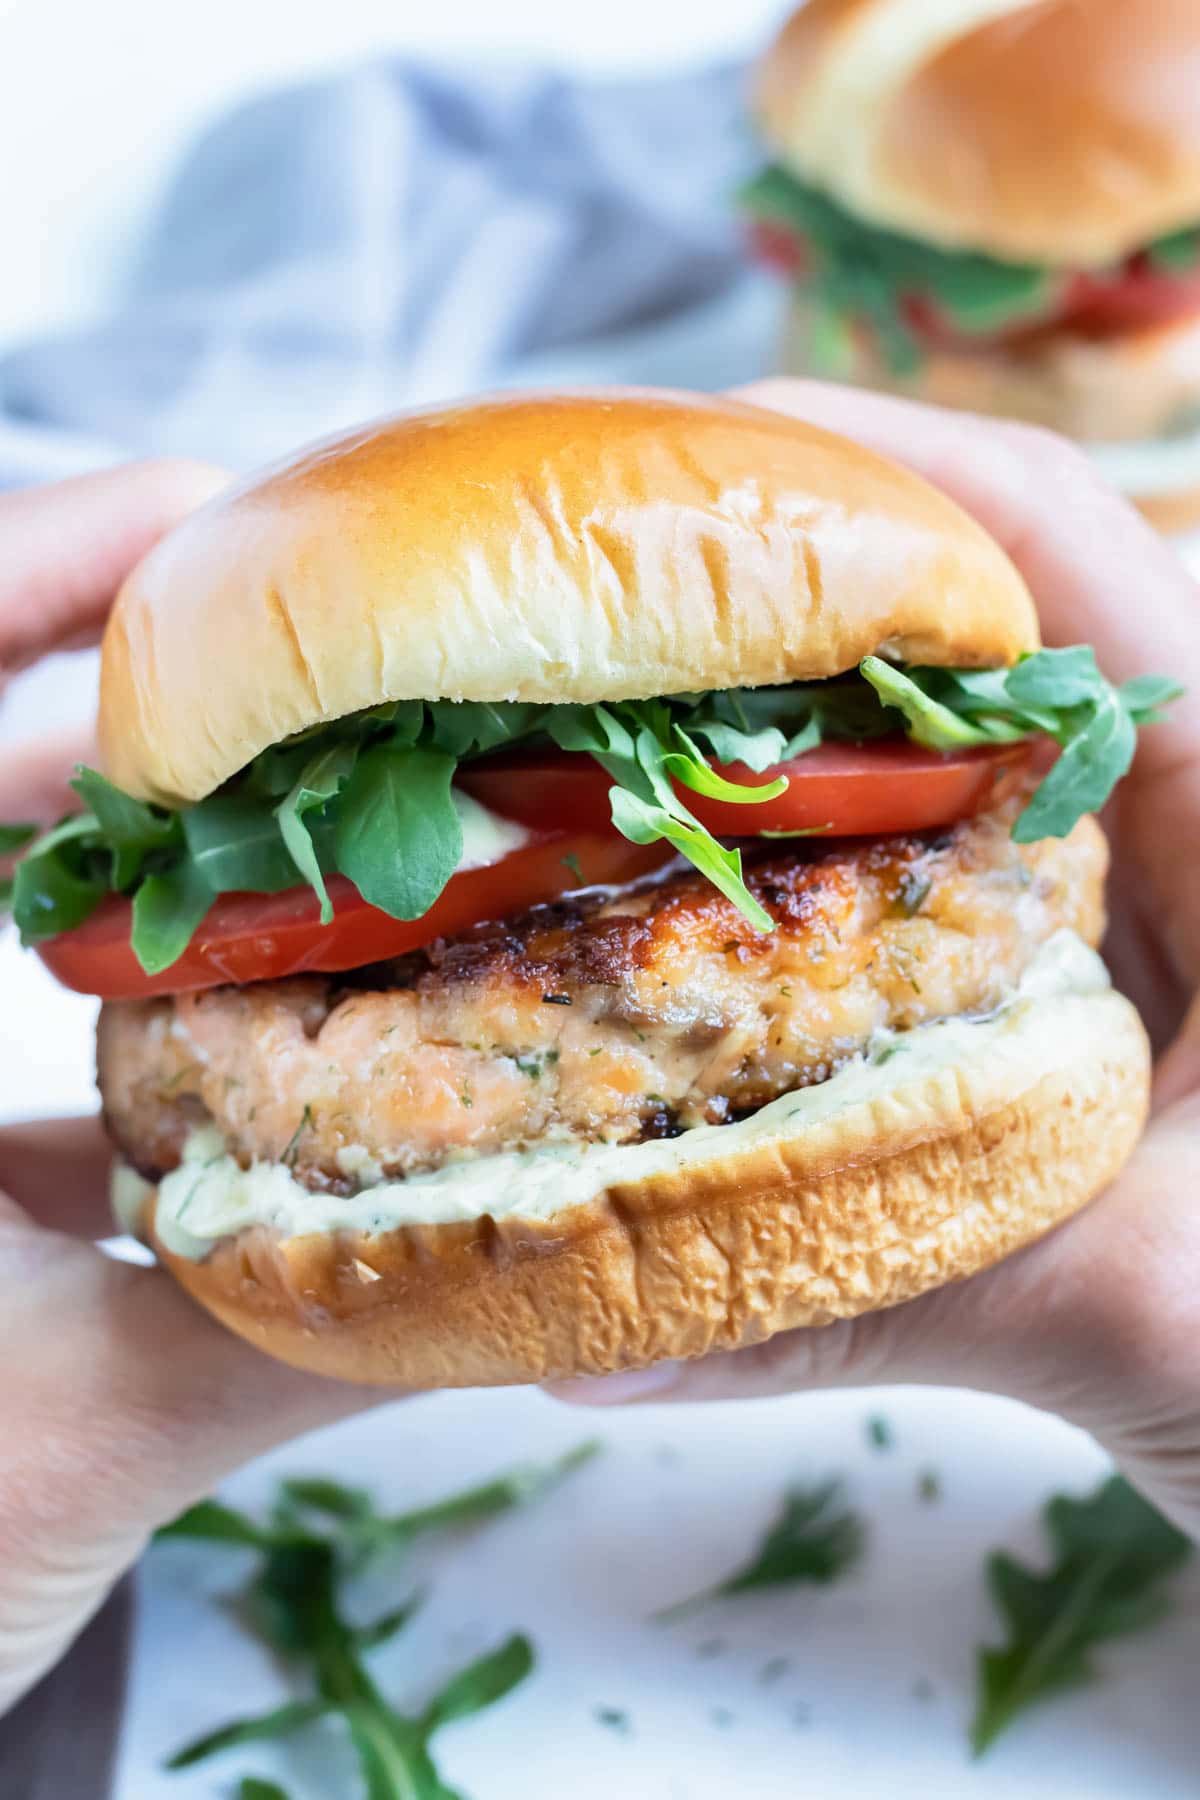 Hands are used to hold a salmon burger for dinner.